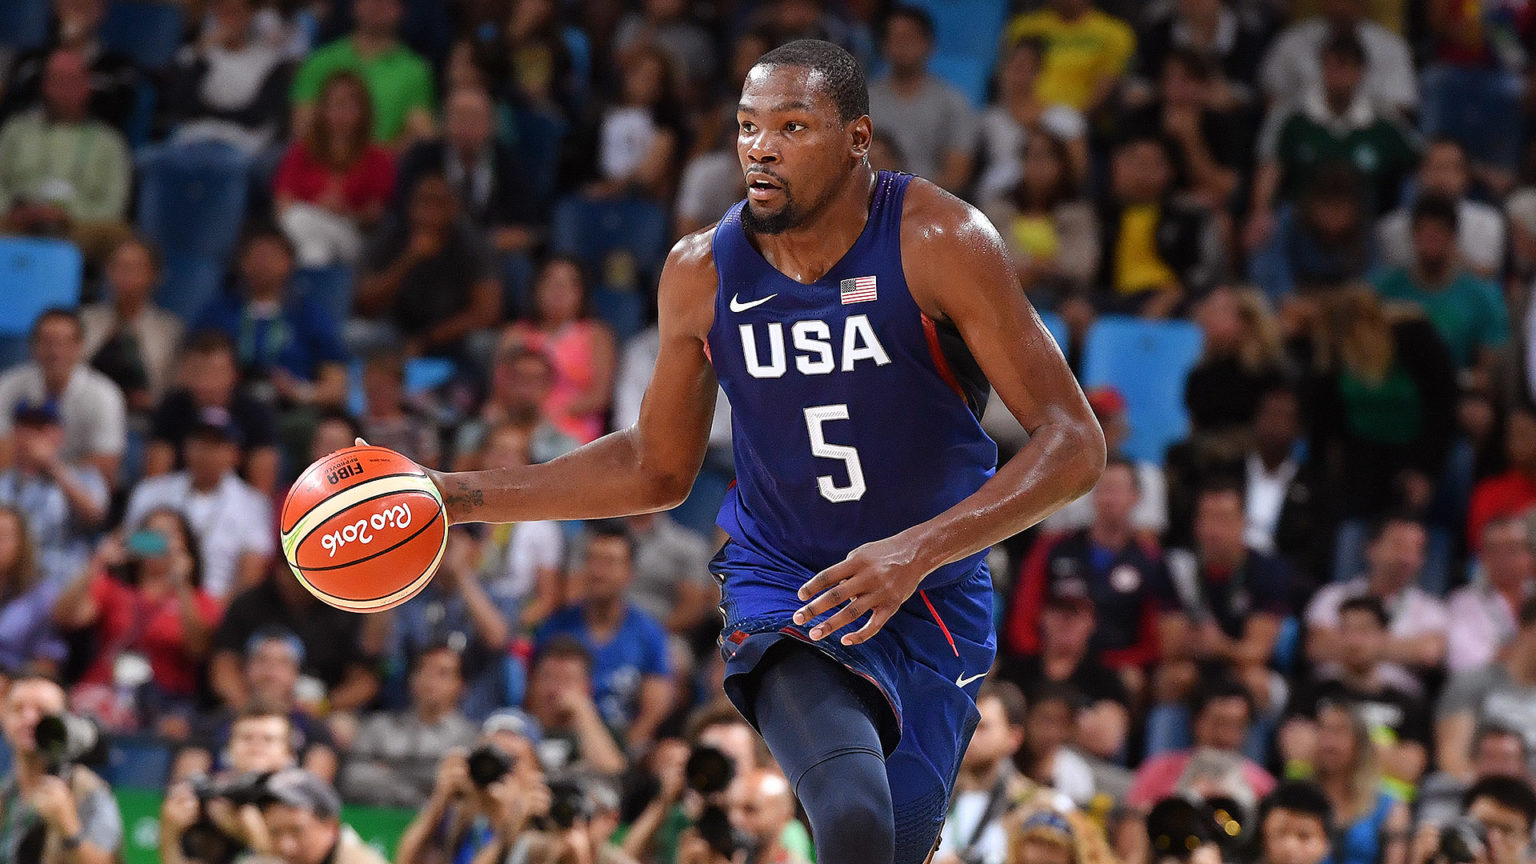 ‘What the hell is going on?’ Reaction as Team USA lose first basketball